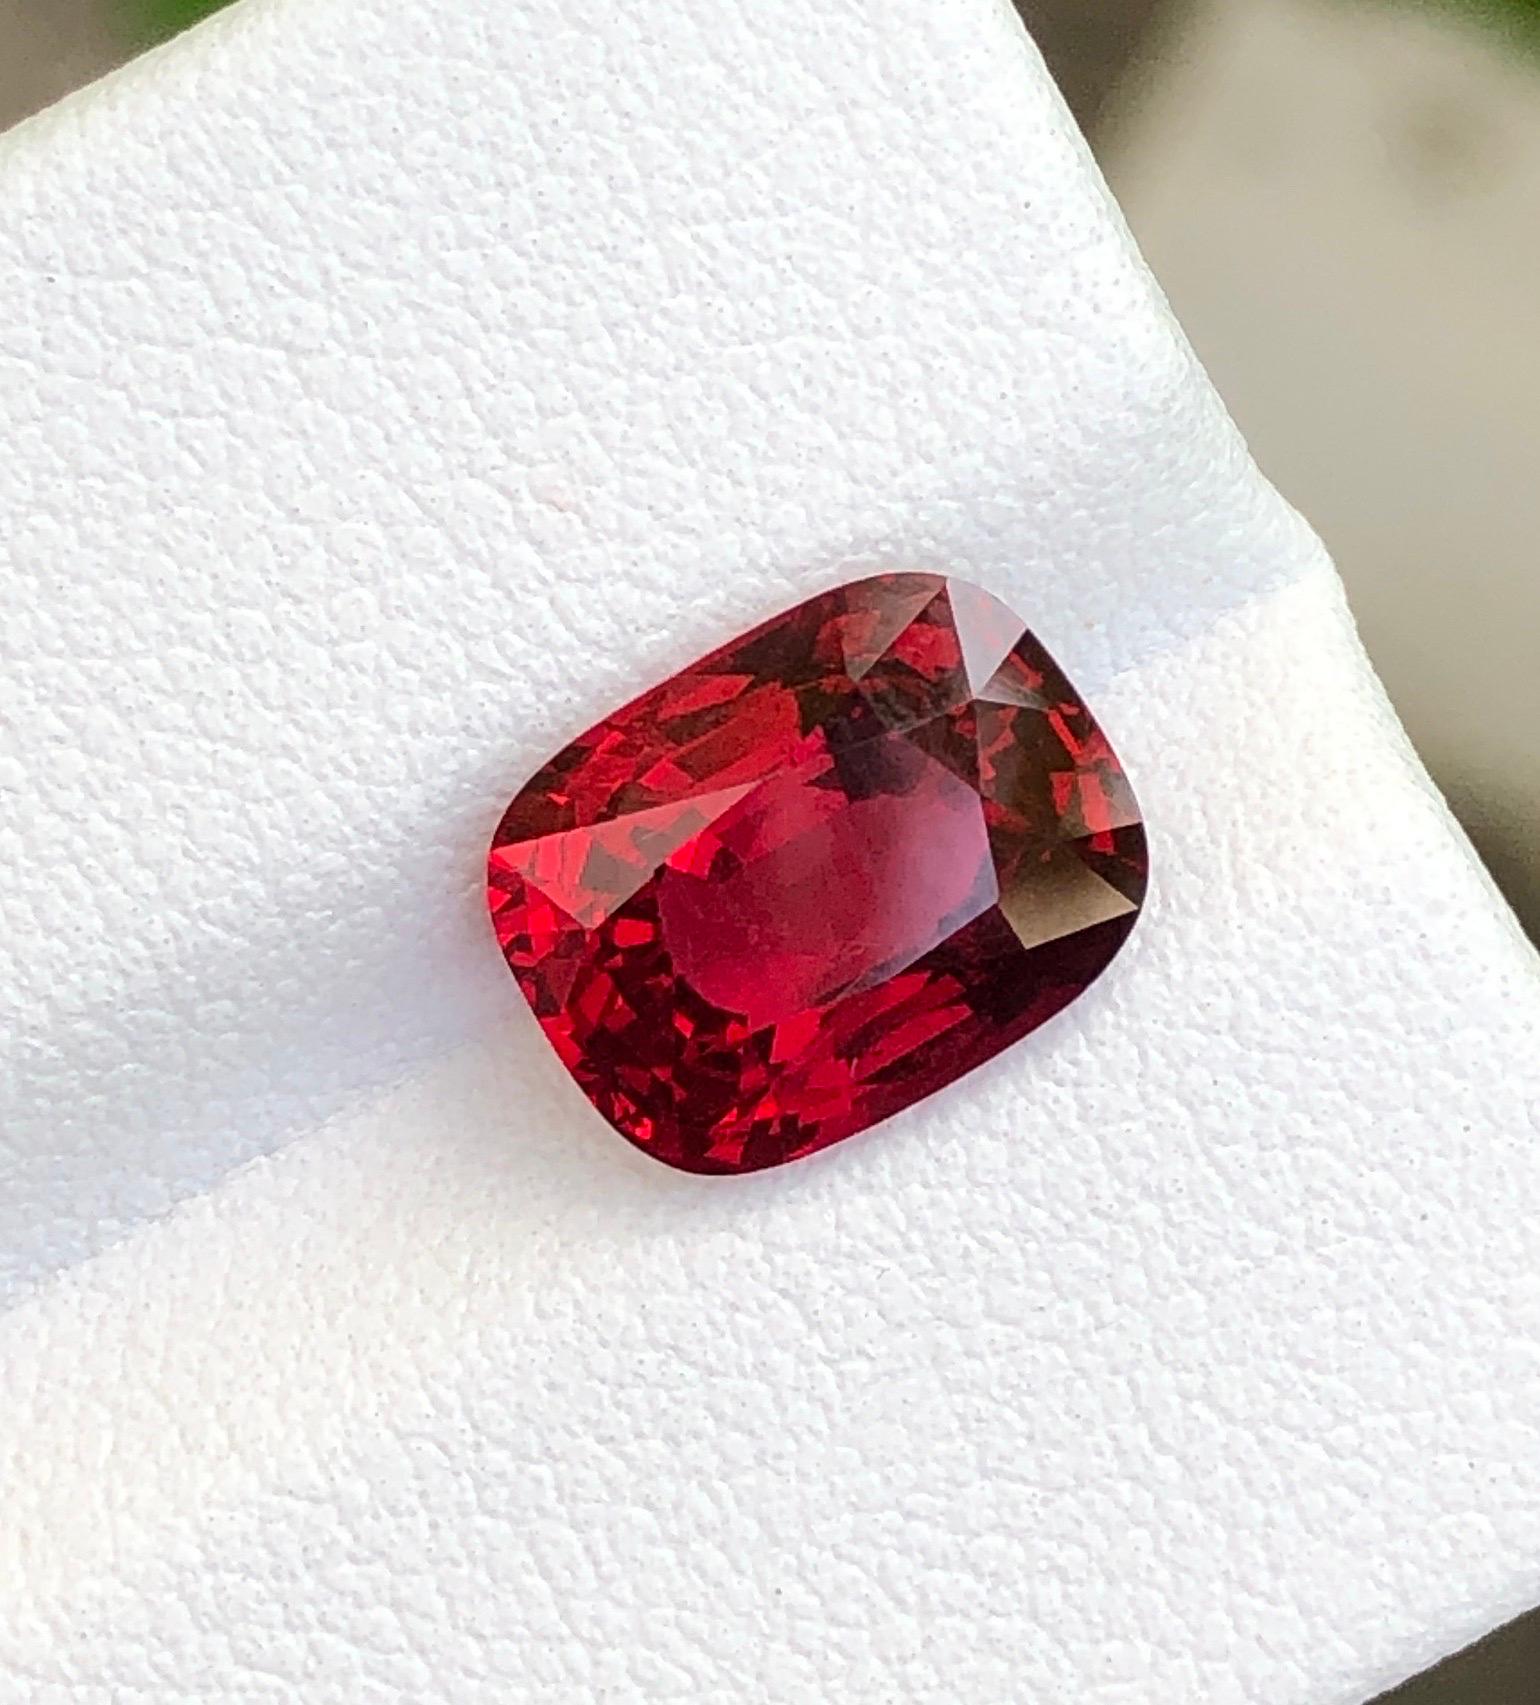 Introducing a captivating 3.61 carat red spinel, radiating rich allure. This gem showcases a pure red hue with no orange undertones, exuding timeless elegance. Its brilliance is impeccable, drawing the eye with every facet. A slight inclusion adds